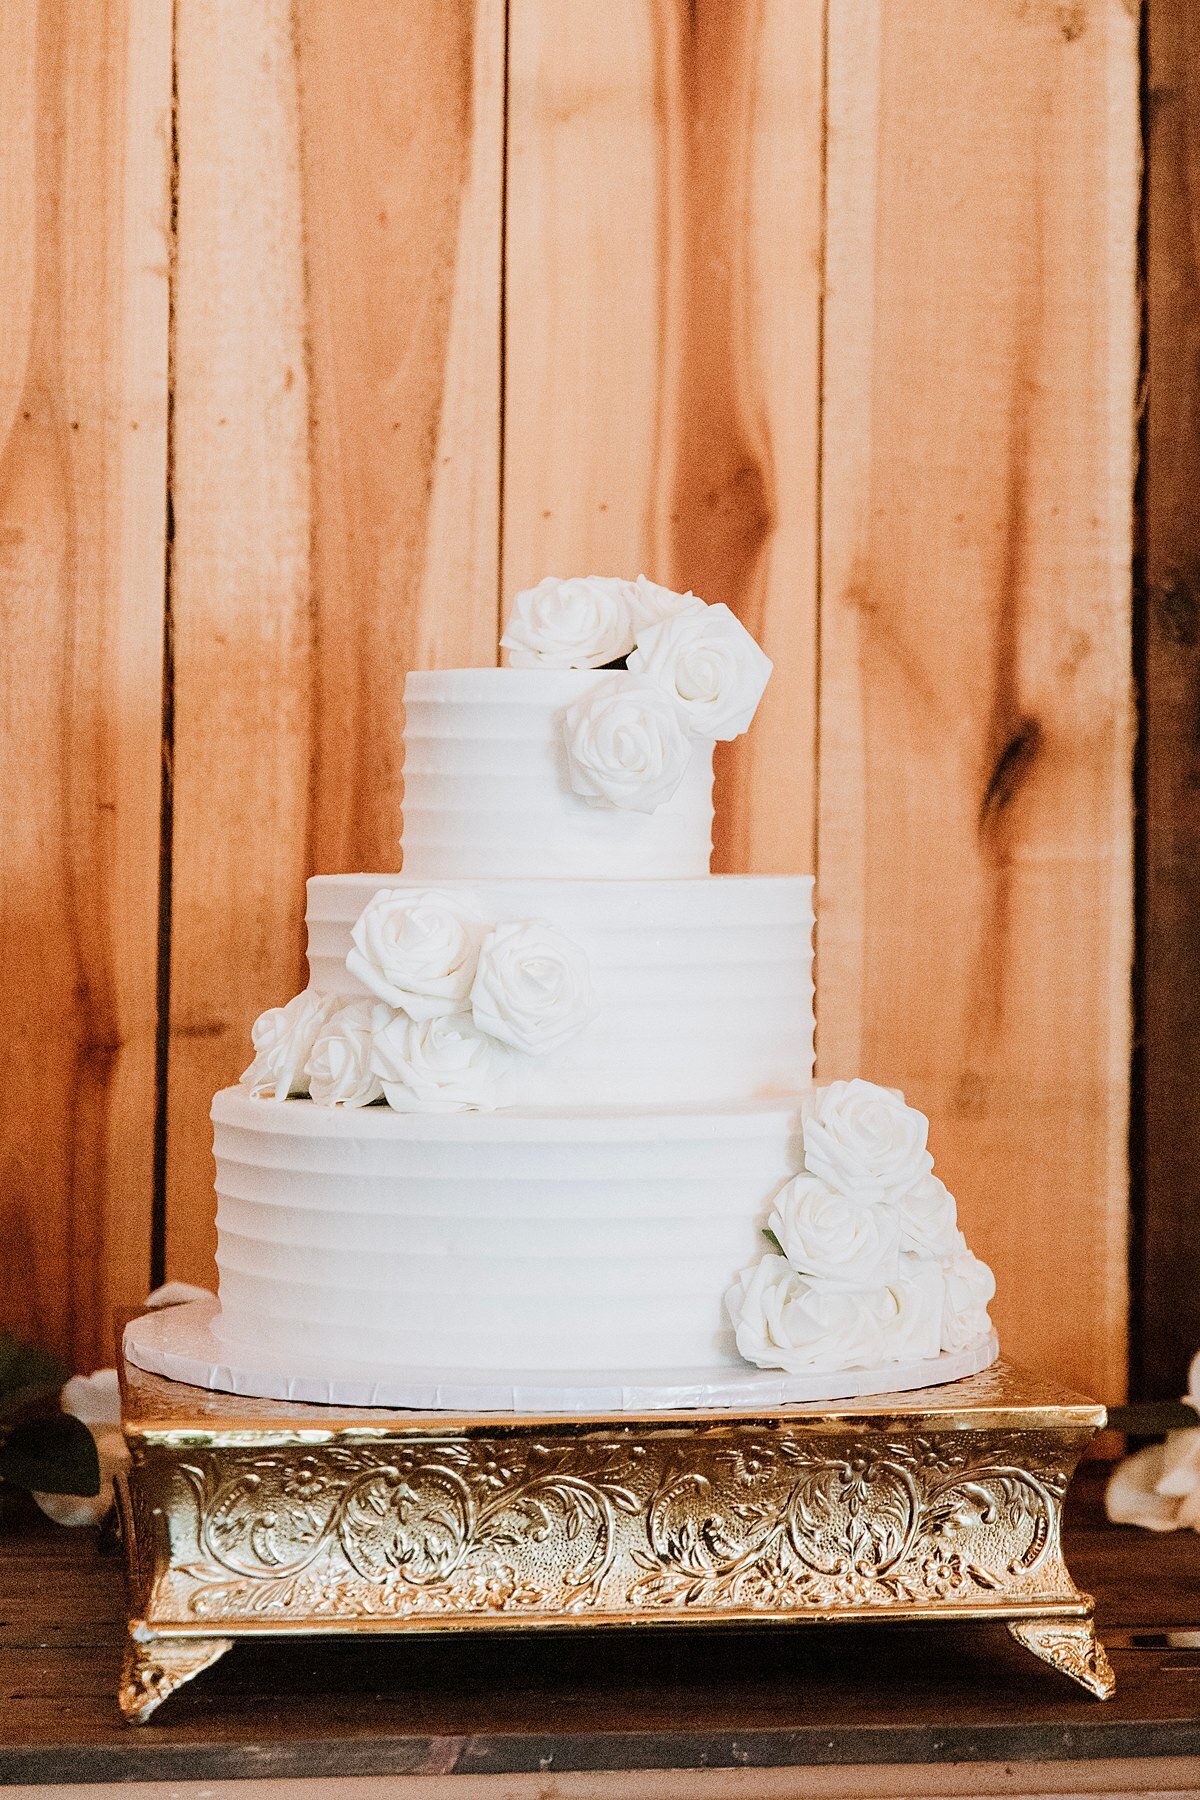 Elegant three tier white wedding cake with white flowers on a square silver cake stand against a light wood wall at Steel Magnolia Barn.